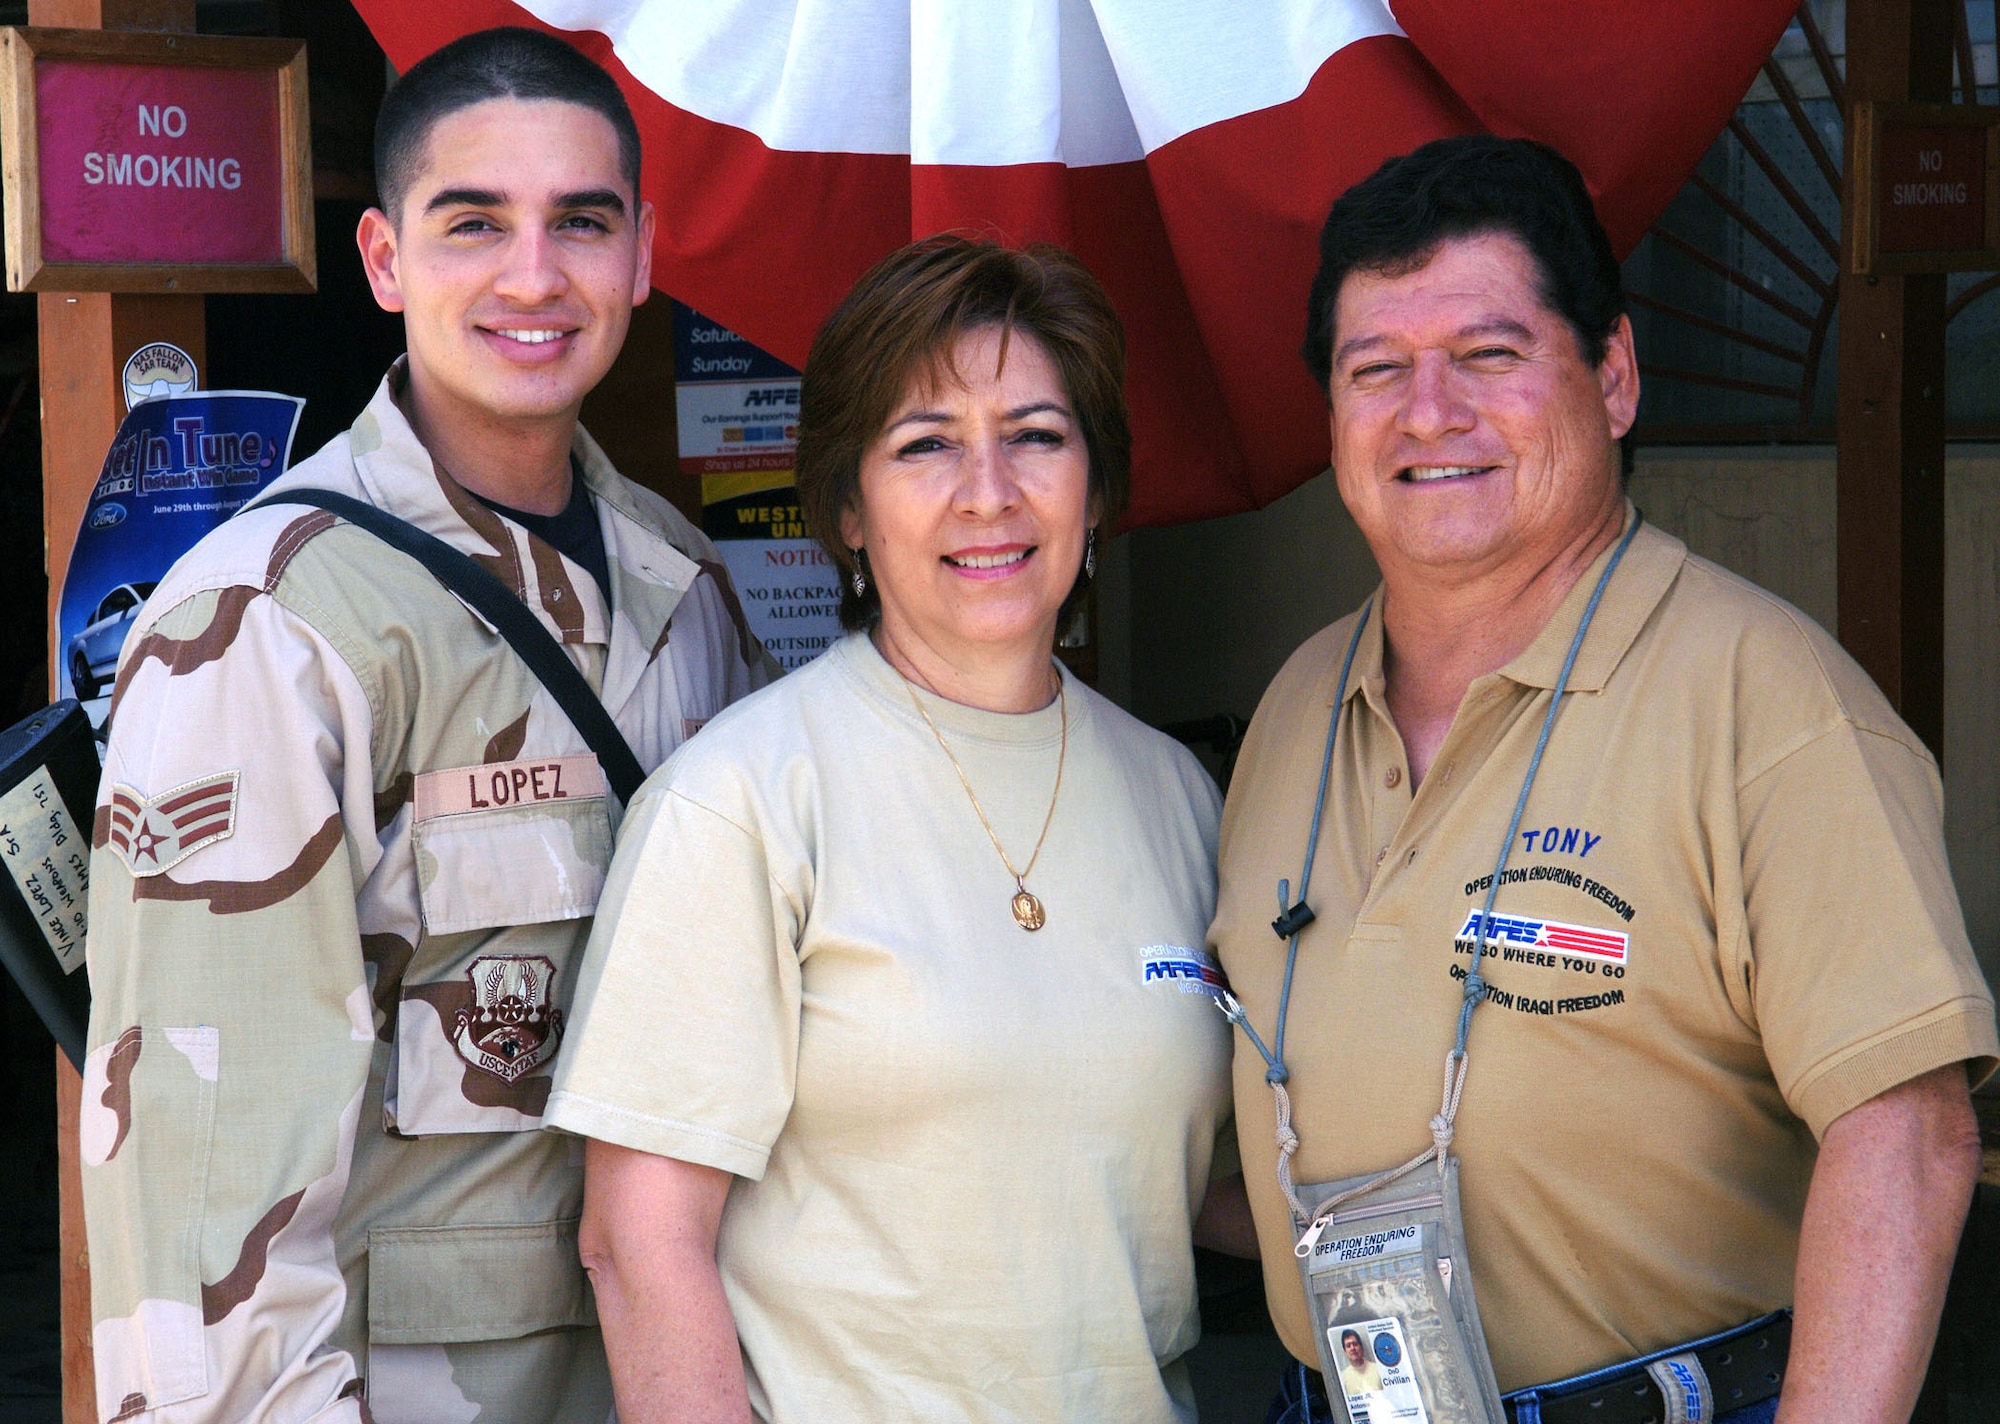 (From left to right) Senior Airman Vincent Lopez, stepmother Julia Lopez and father Tony Lopez. Airman Lopez is an A-10 weapons loader assigned to the 354th Expeditionary Aircraft Maintenance Unit deployed from Davis-Monthan Air Force Base, Ariz. The Lopez family are all deployed to Bagram together. (U.S. Air Force photo by Staff Sgt. Craig Seals)